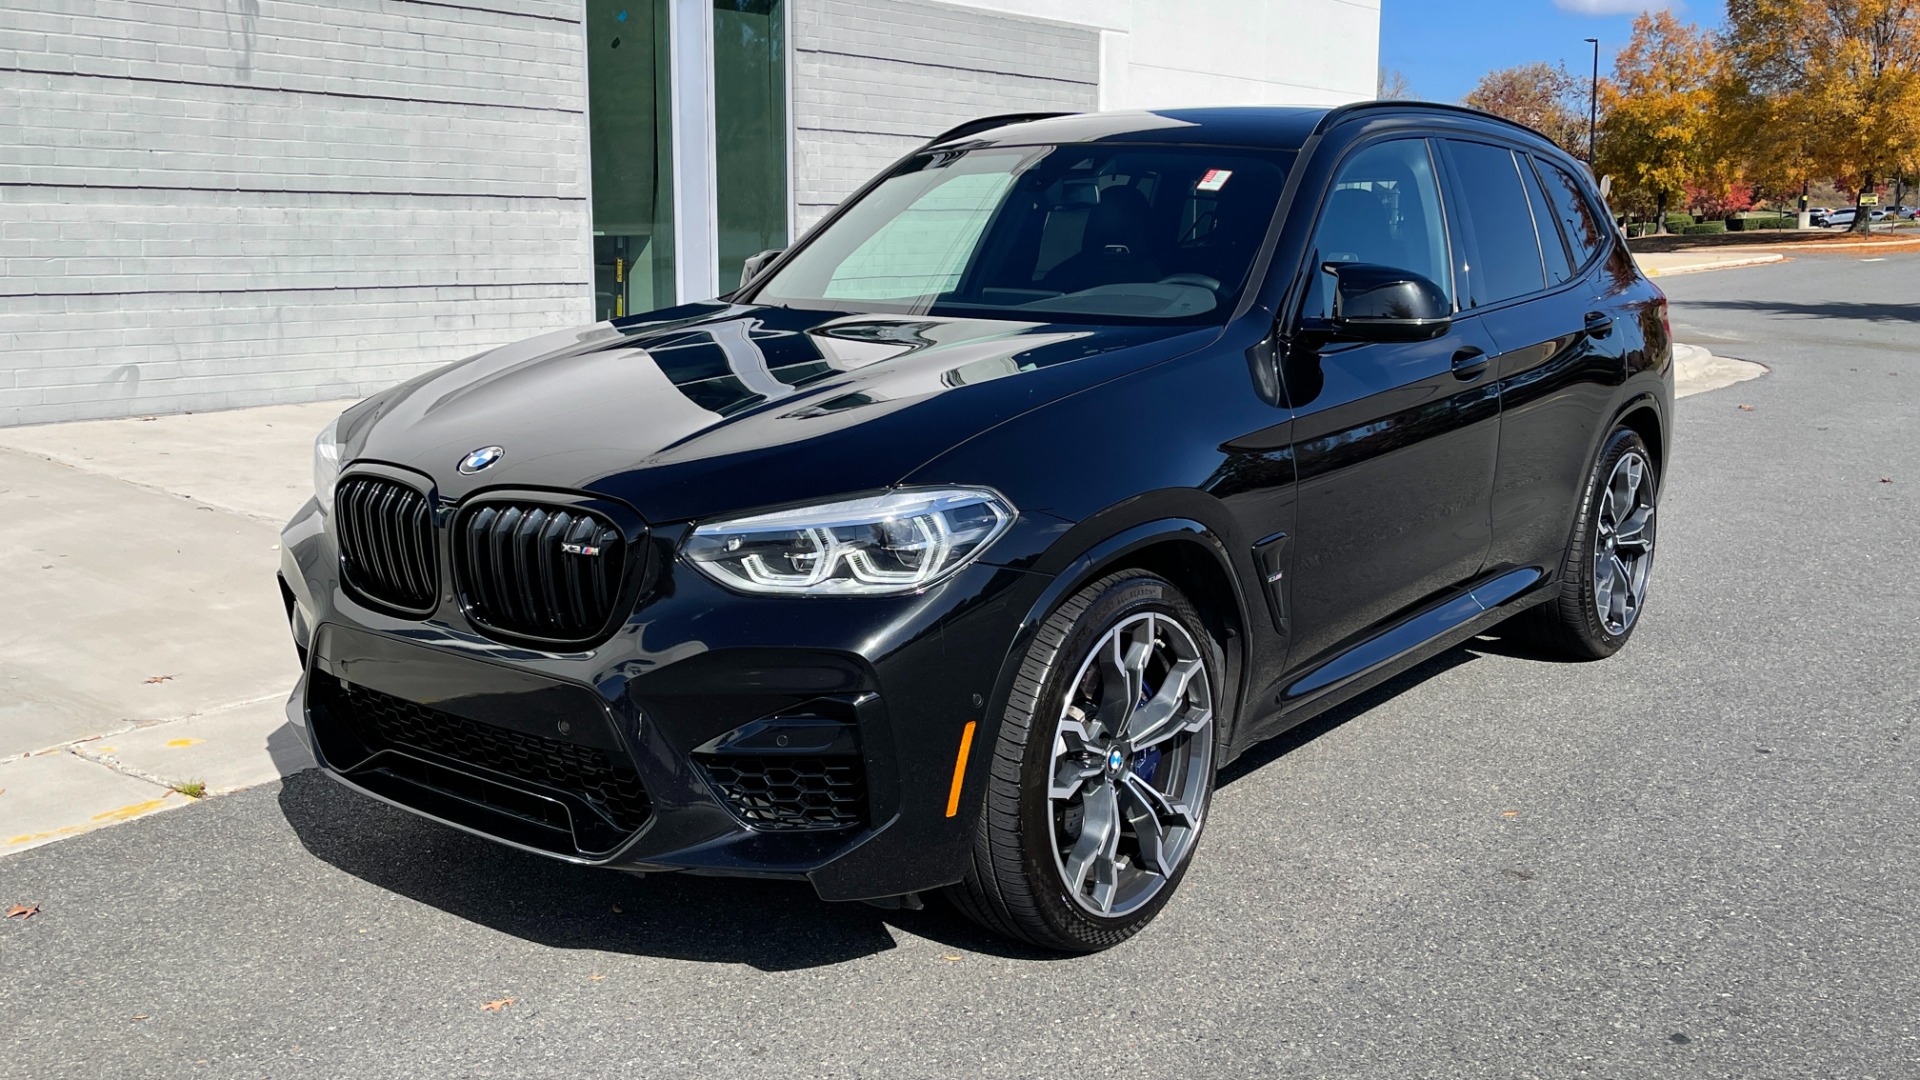 Used 2020 BMW X3 M MERINO LEATHER / EXECUTIVE PACKAGE / DINAN EXHAUST for sale $58,999 at Formula Imports in Charlotte NC 28227 2